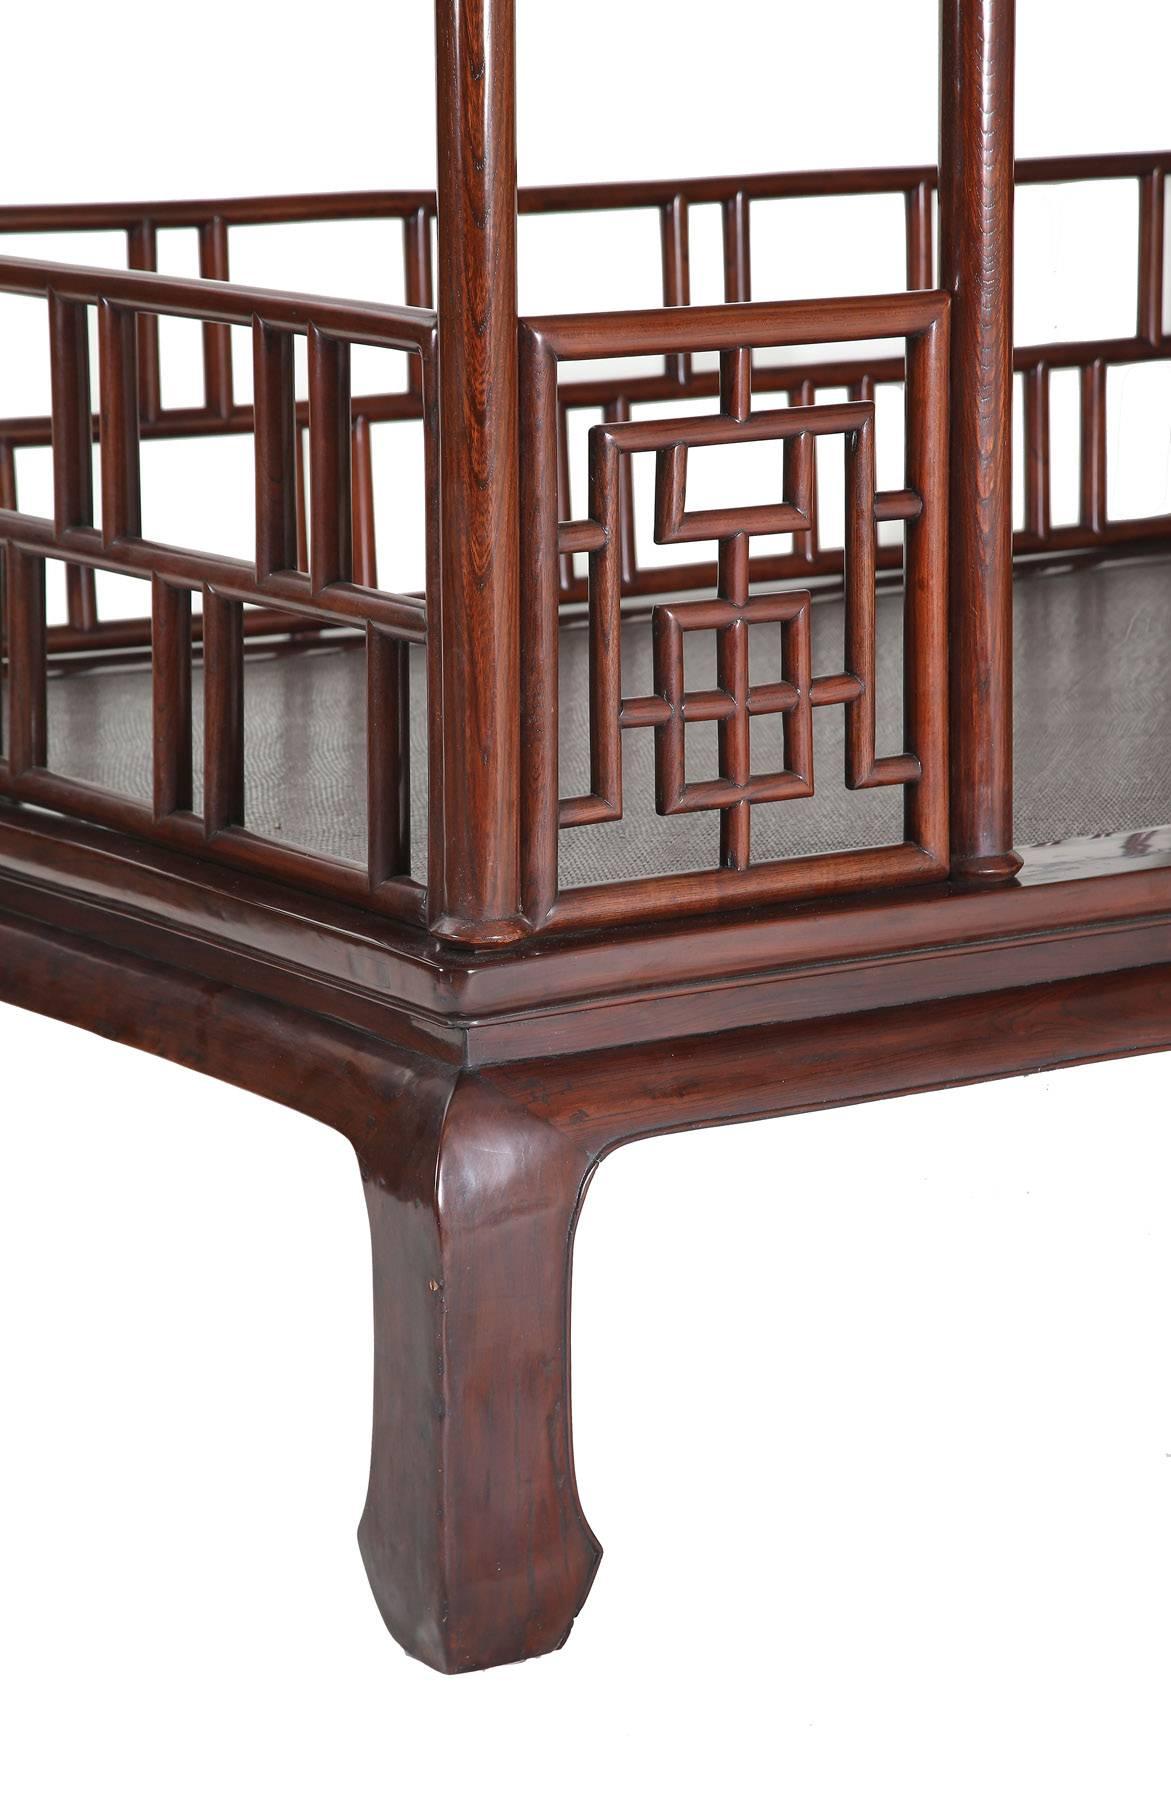 Qing Antique Chinese Six Post Canopy Bed, circa 1800, Chinoiserie, Zhejiang